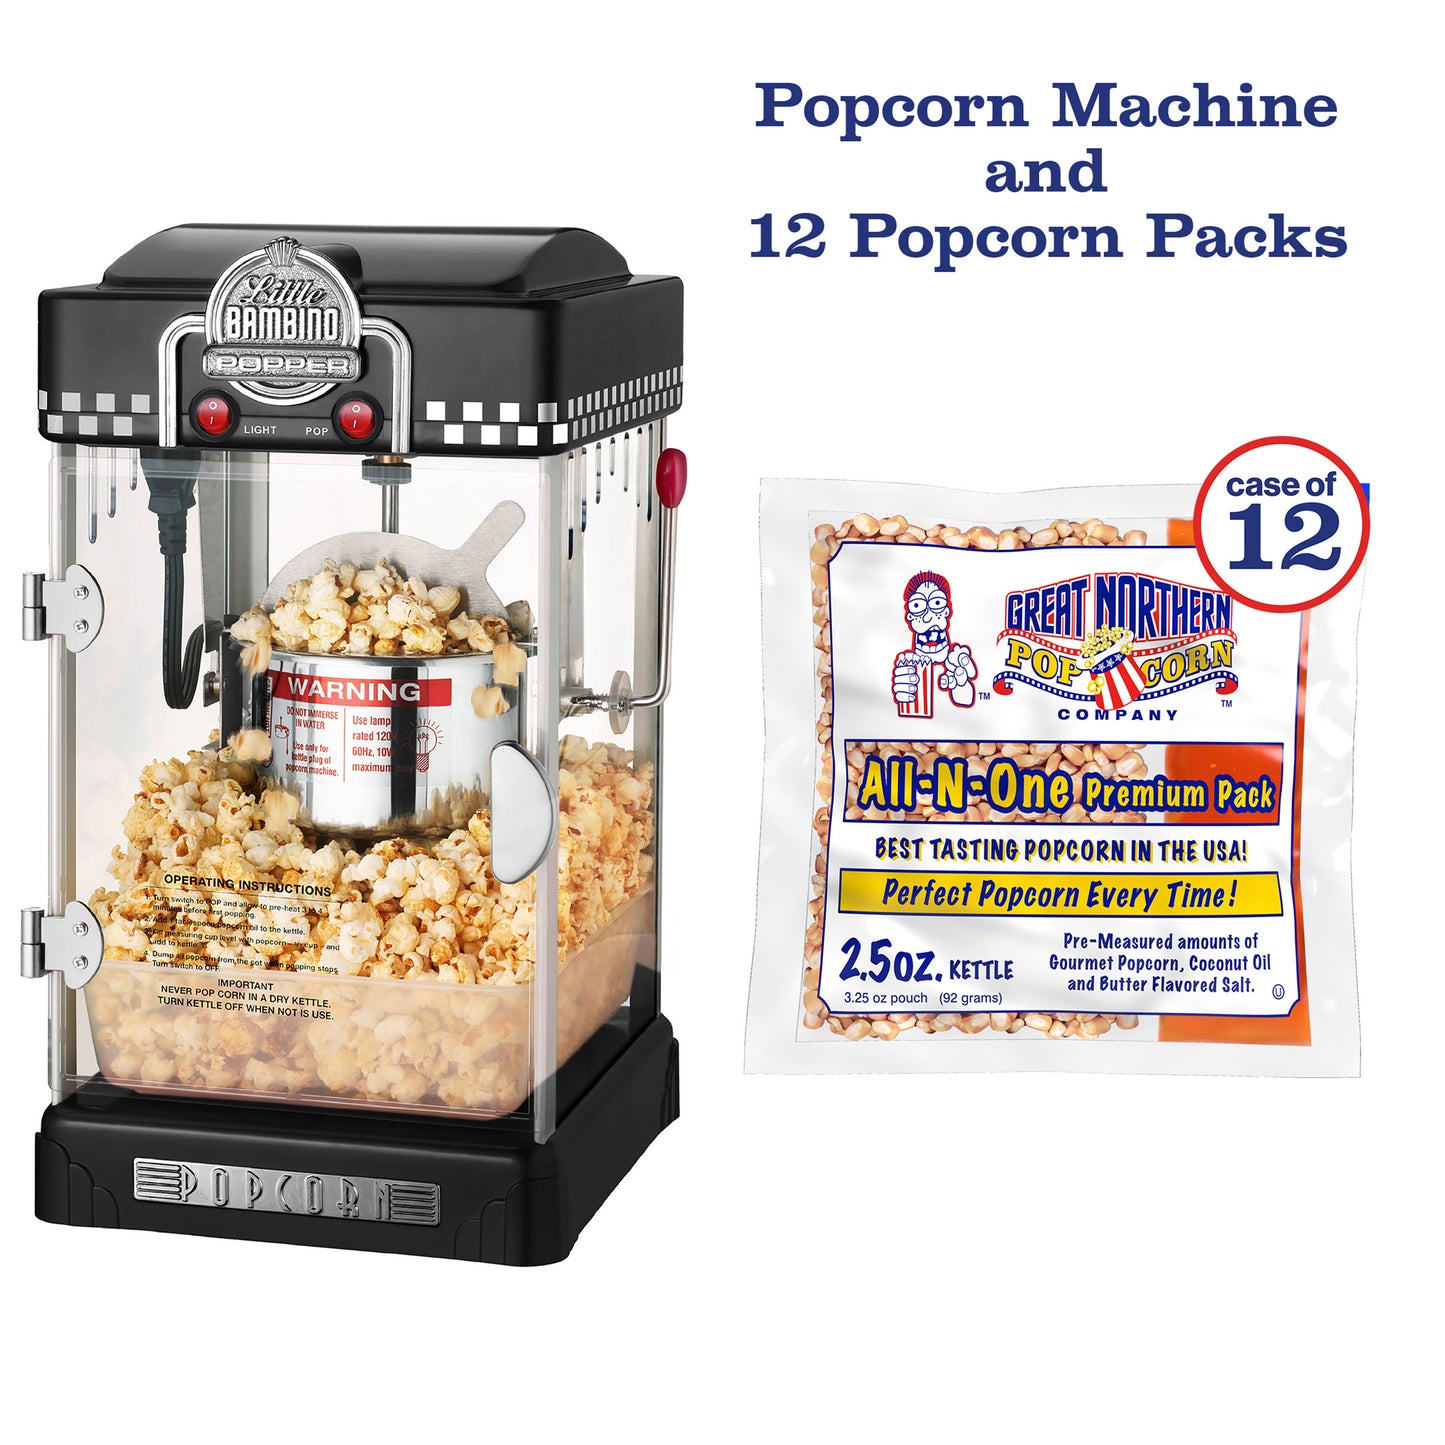 Little Bambino Popcorn Machine with 2.5 Ounce Kettle and 12 Pack of All-In-One Popcorn Kernel Packets - Black